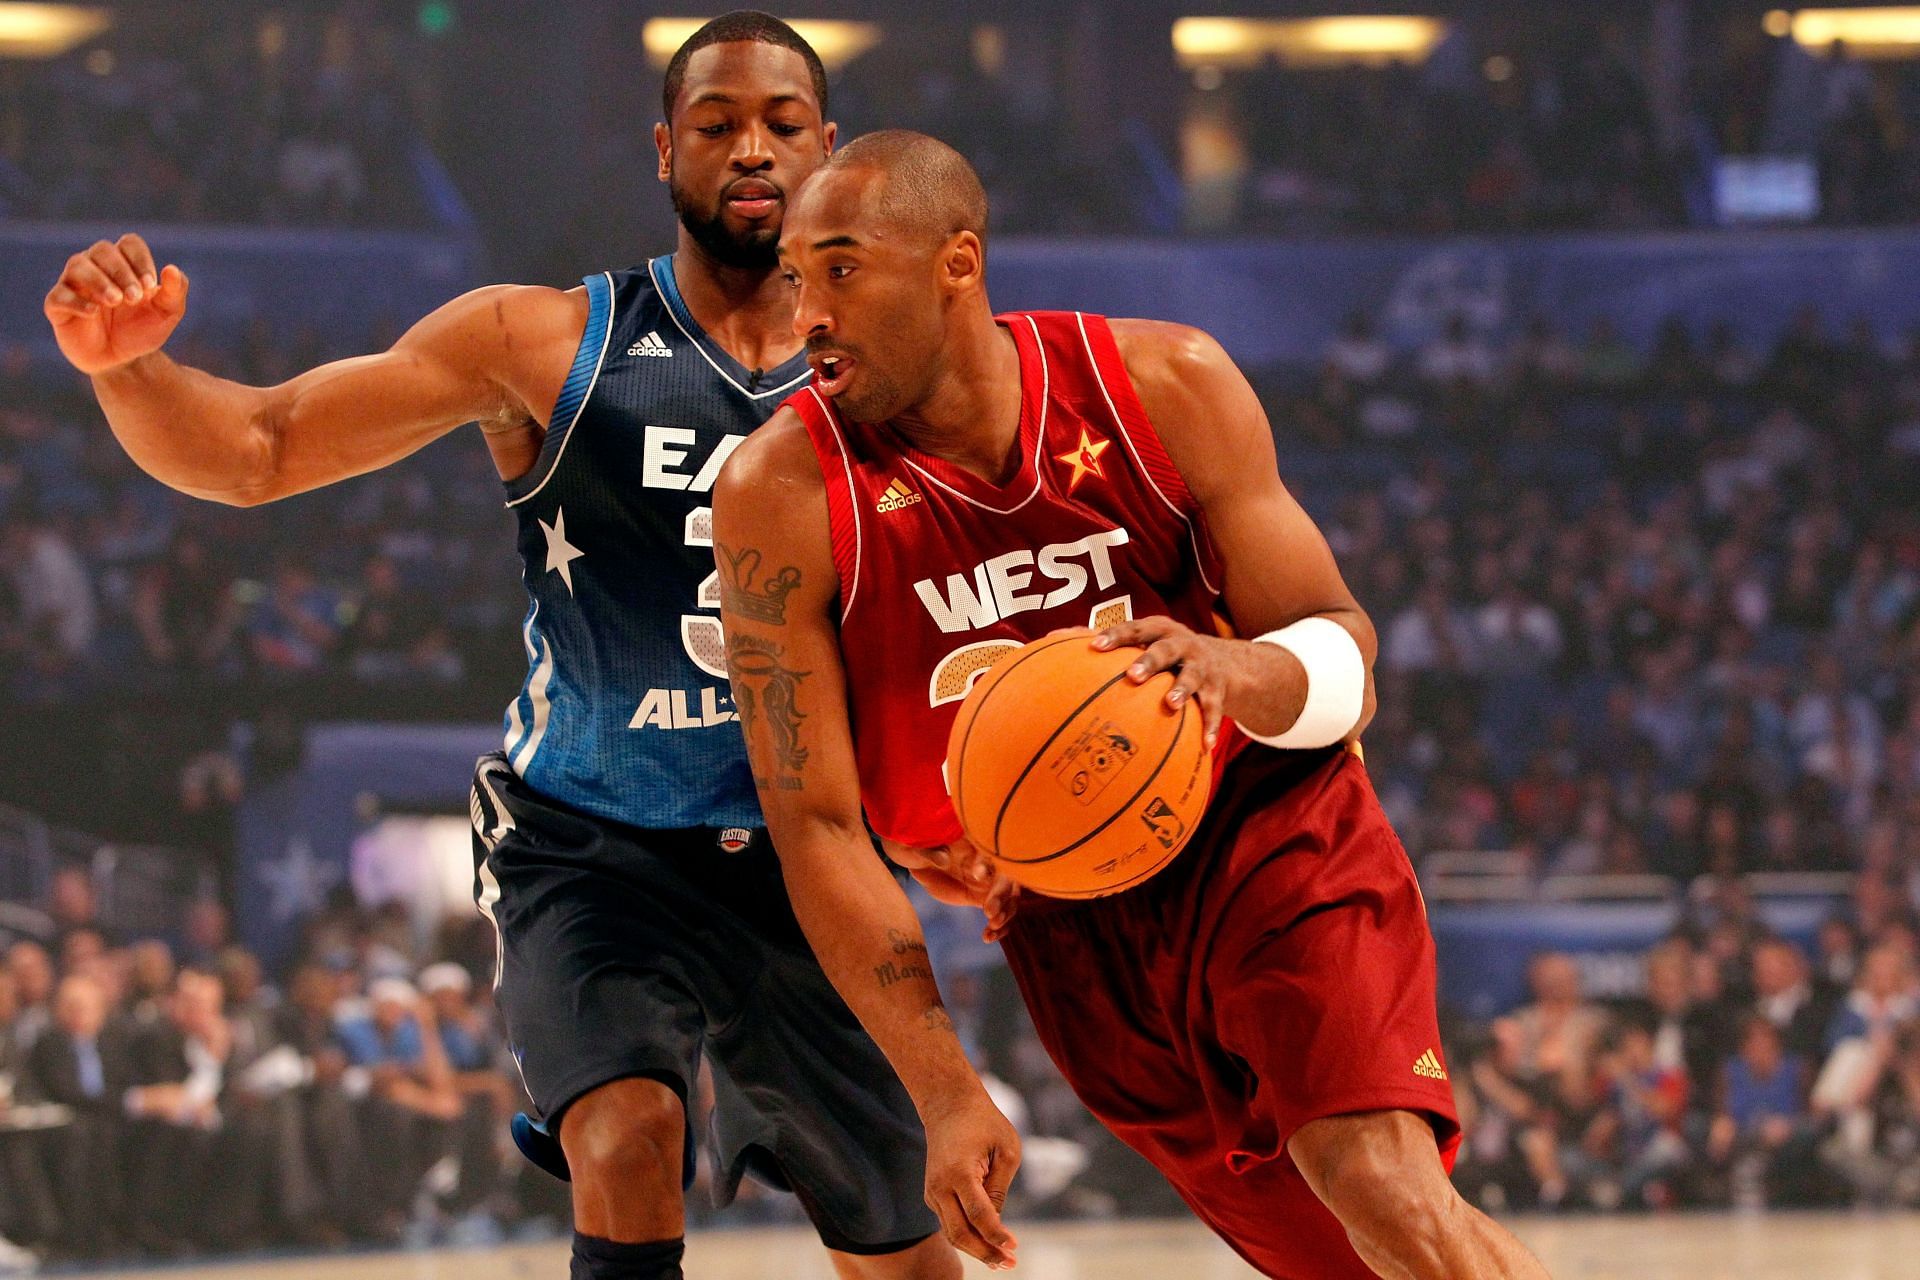 Kobe Bryant and Dwyane Wade have appeared in a combined 13 All-Star games